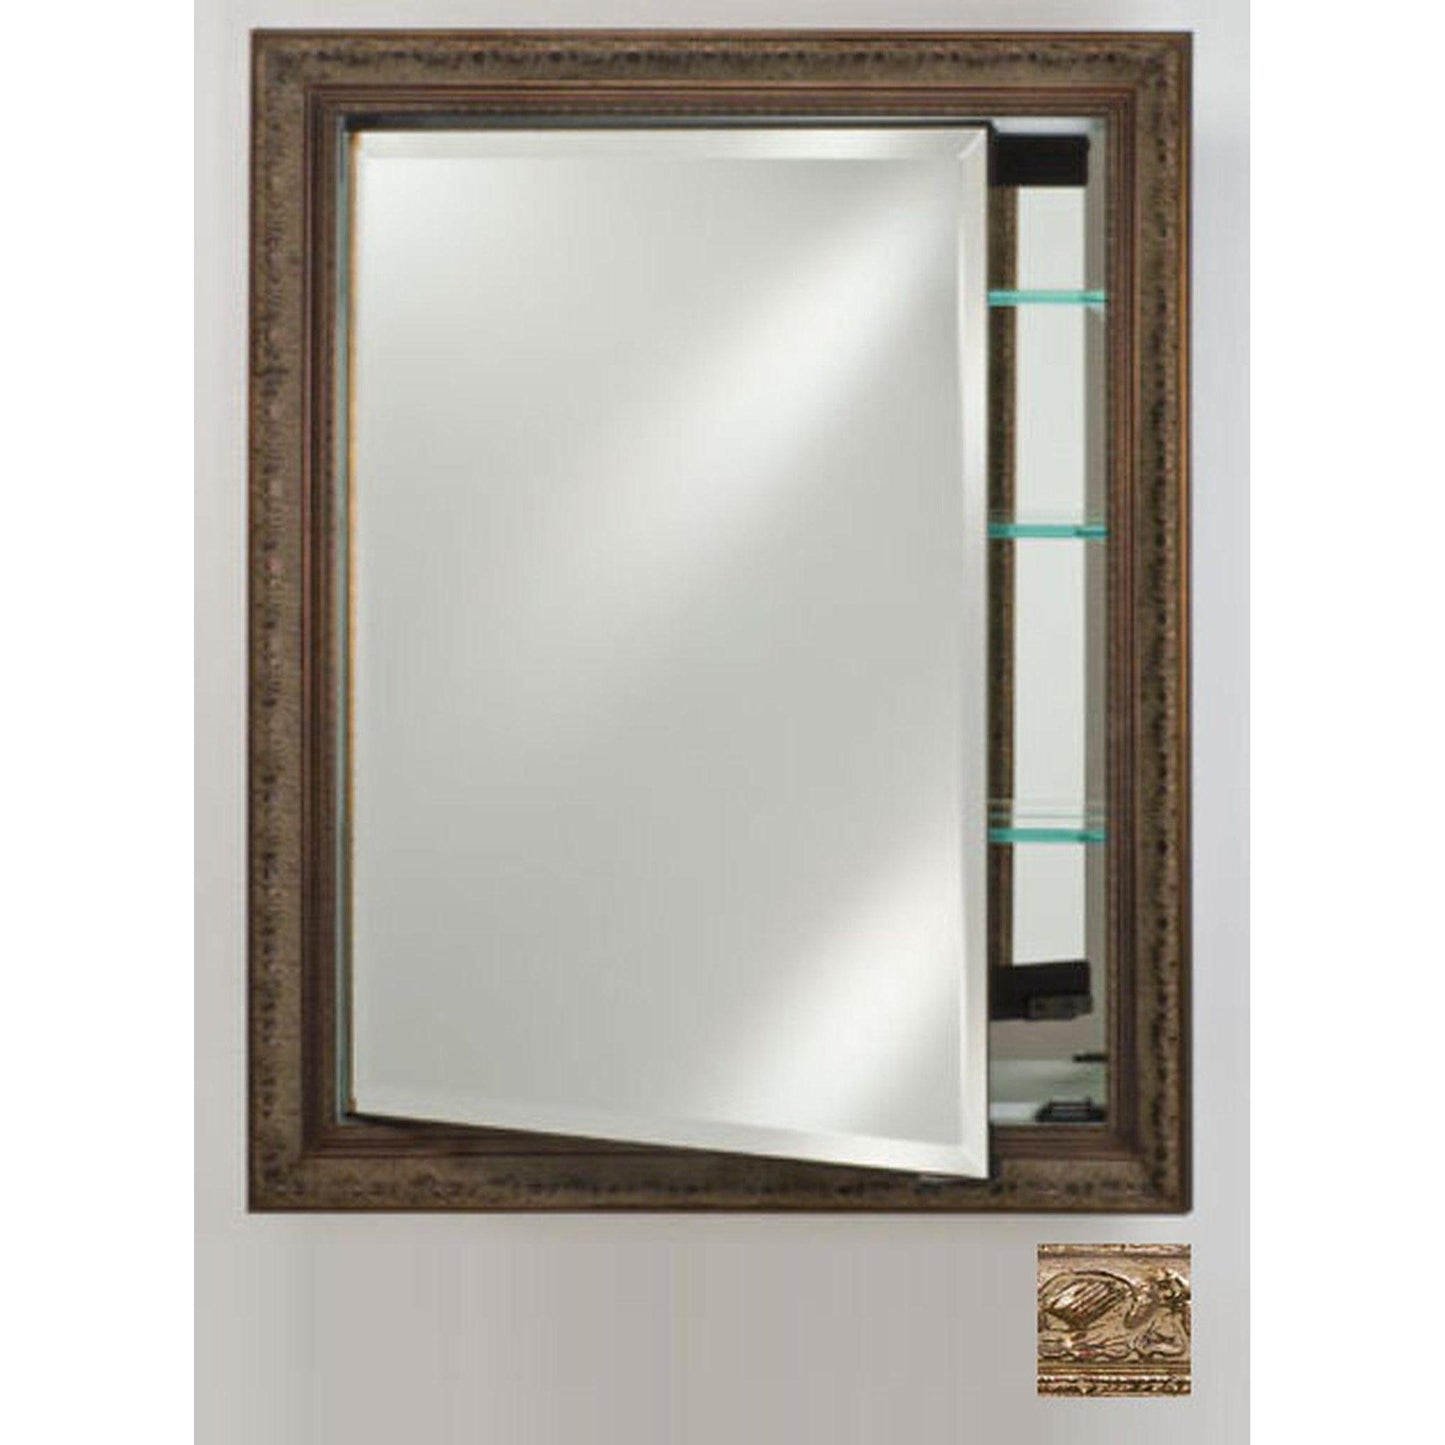 Afina Signature 24" x 36" Tuscany Antique Silver Recessed Reversible Hinged Single Door Medicine Cabinet With Beveled Edge Mirror